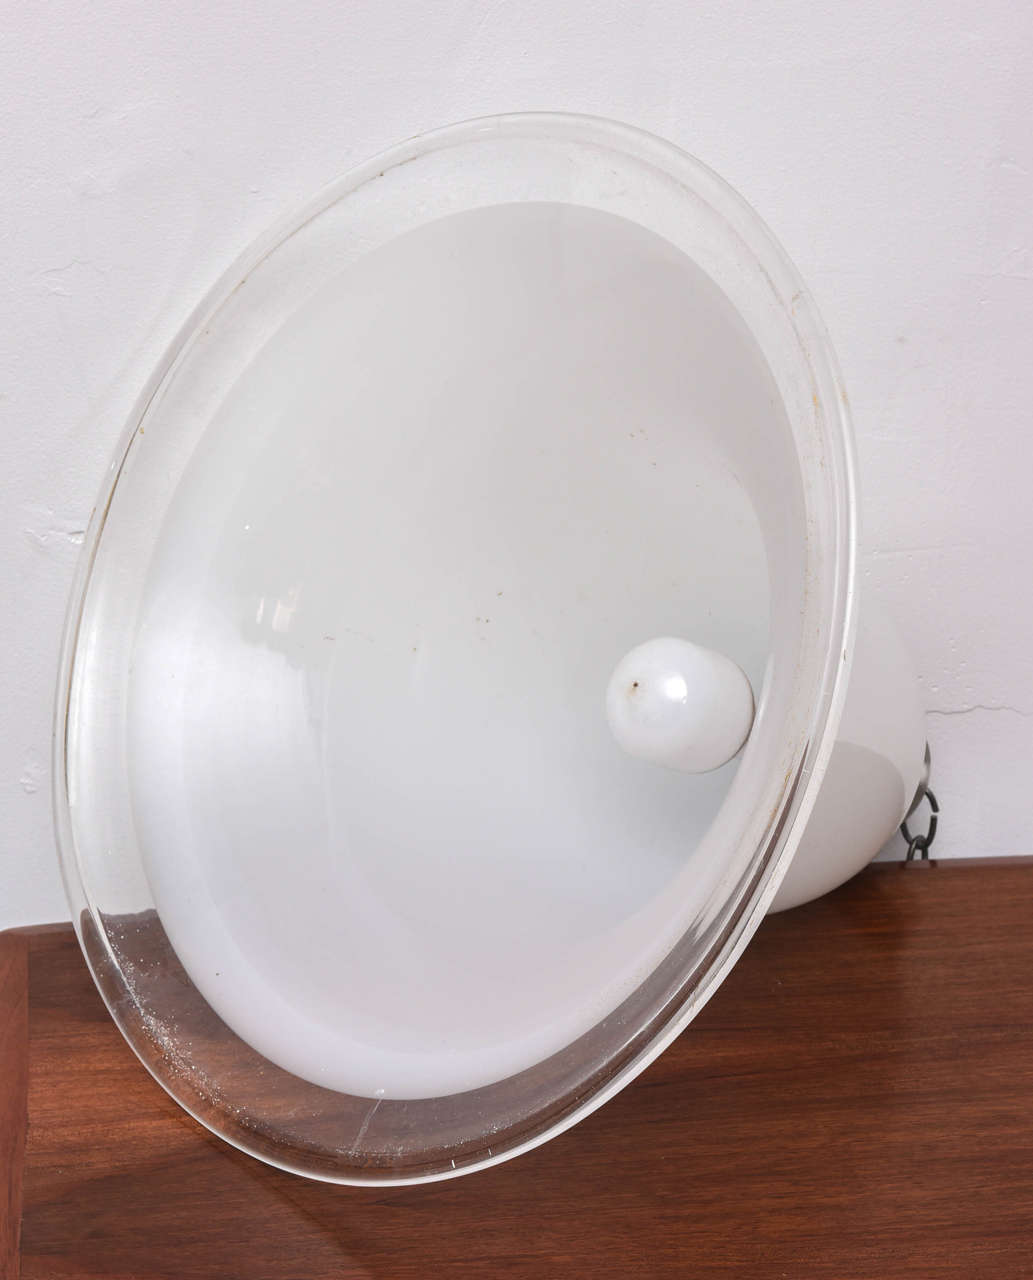 Glass Murano Vintage Overhead Bank Lamp from 1940s Italy